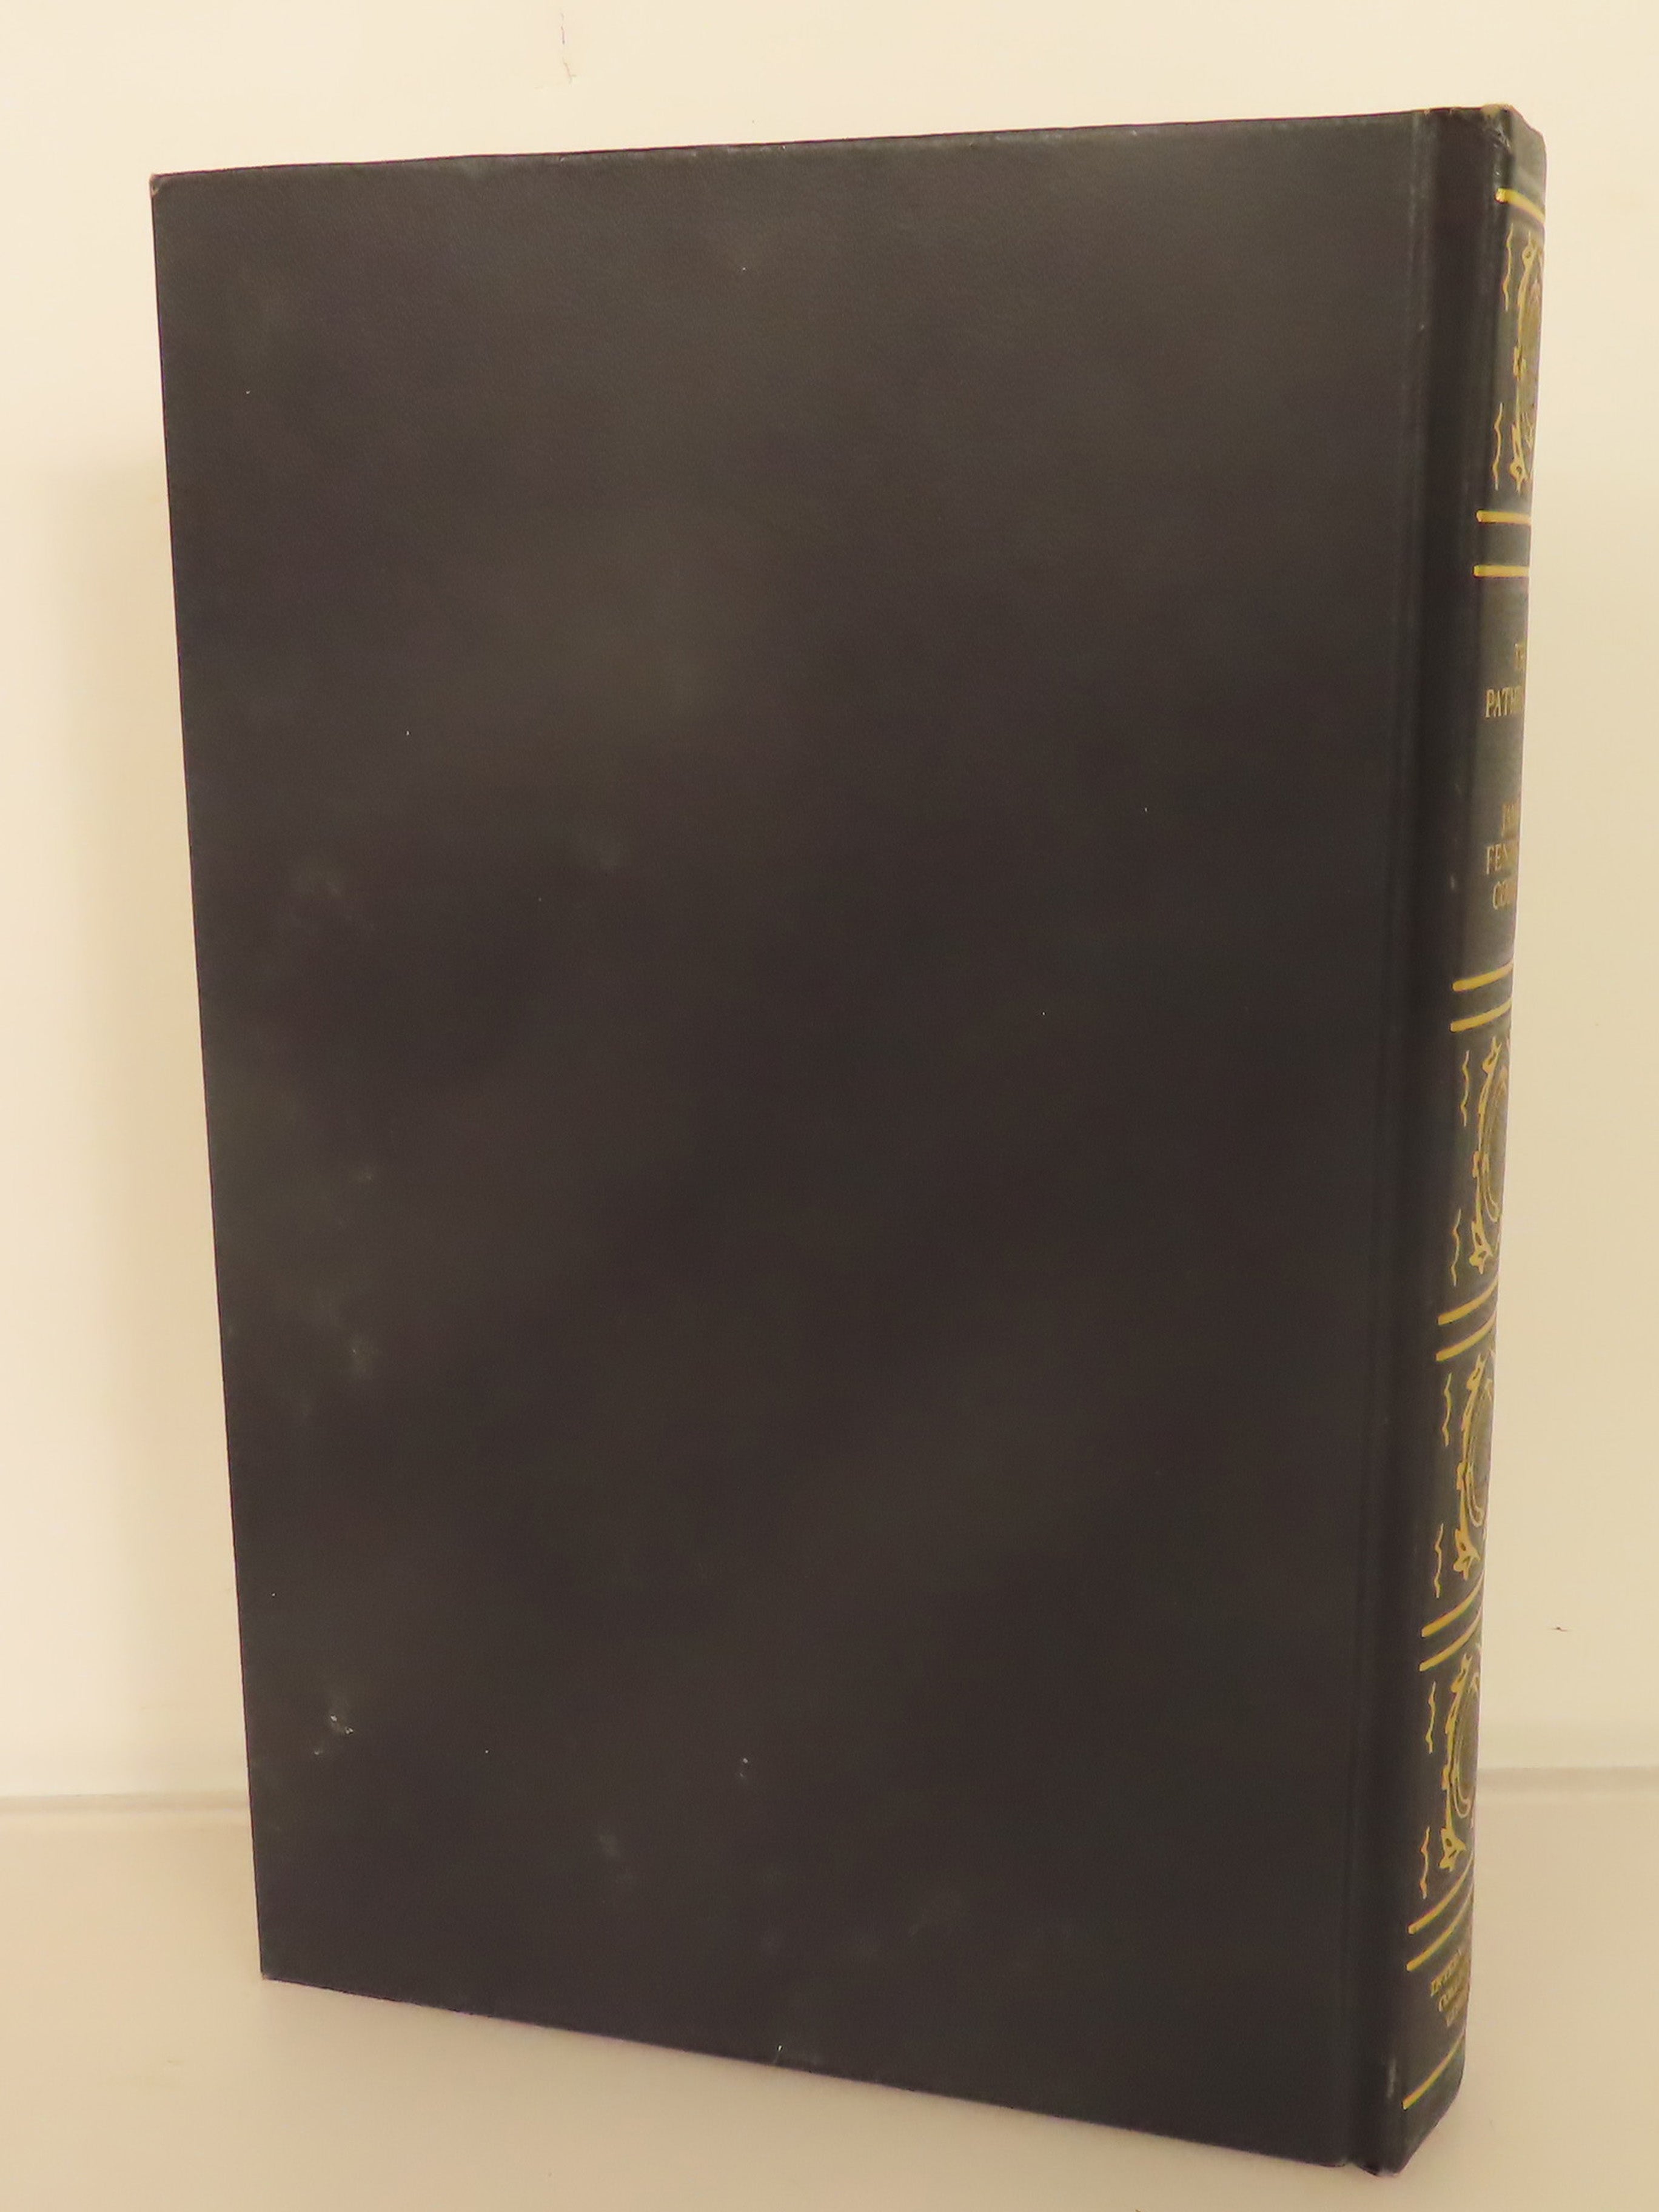 International Collectors Library The Pathfinder by James Fenimore Cooper